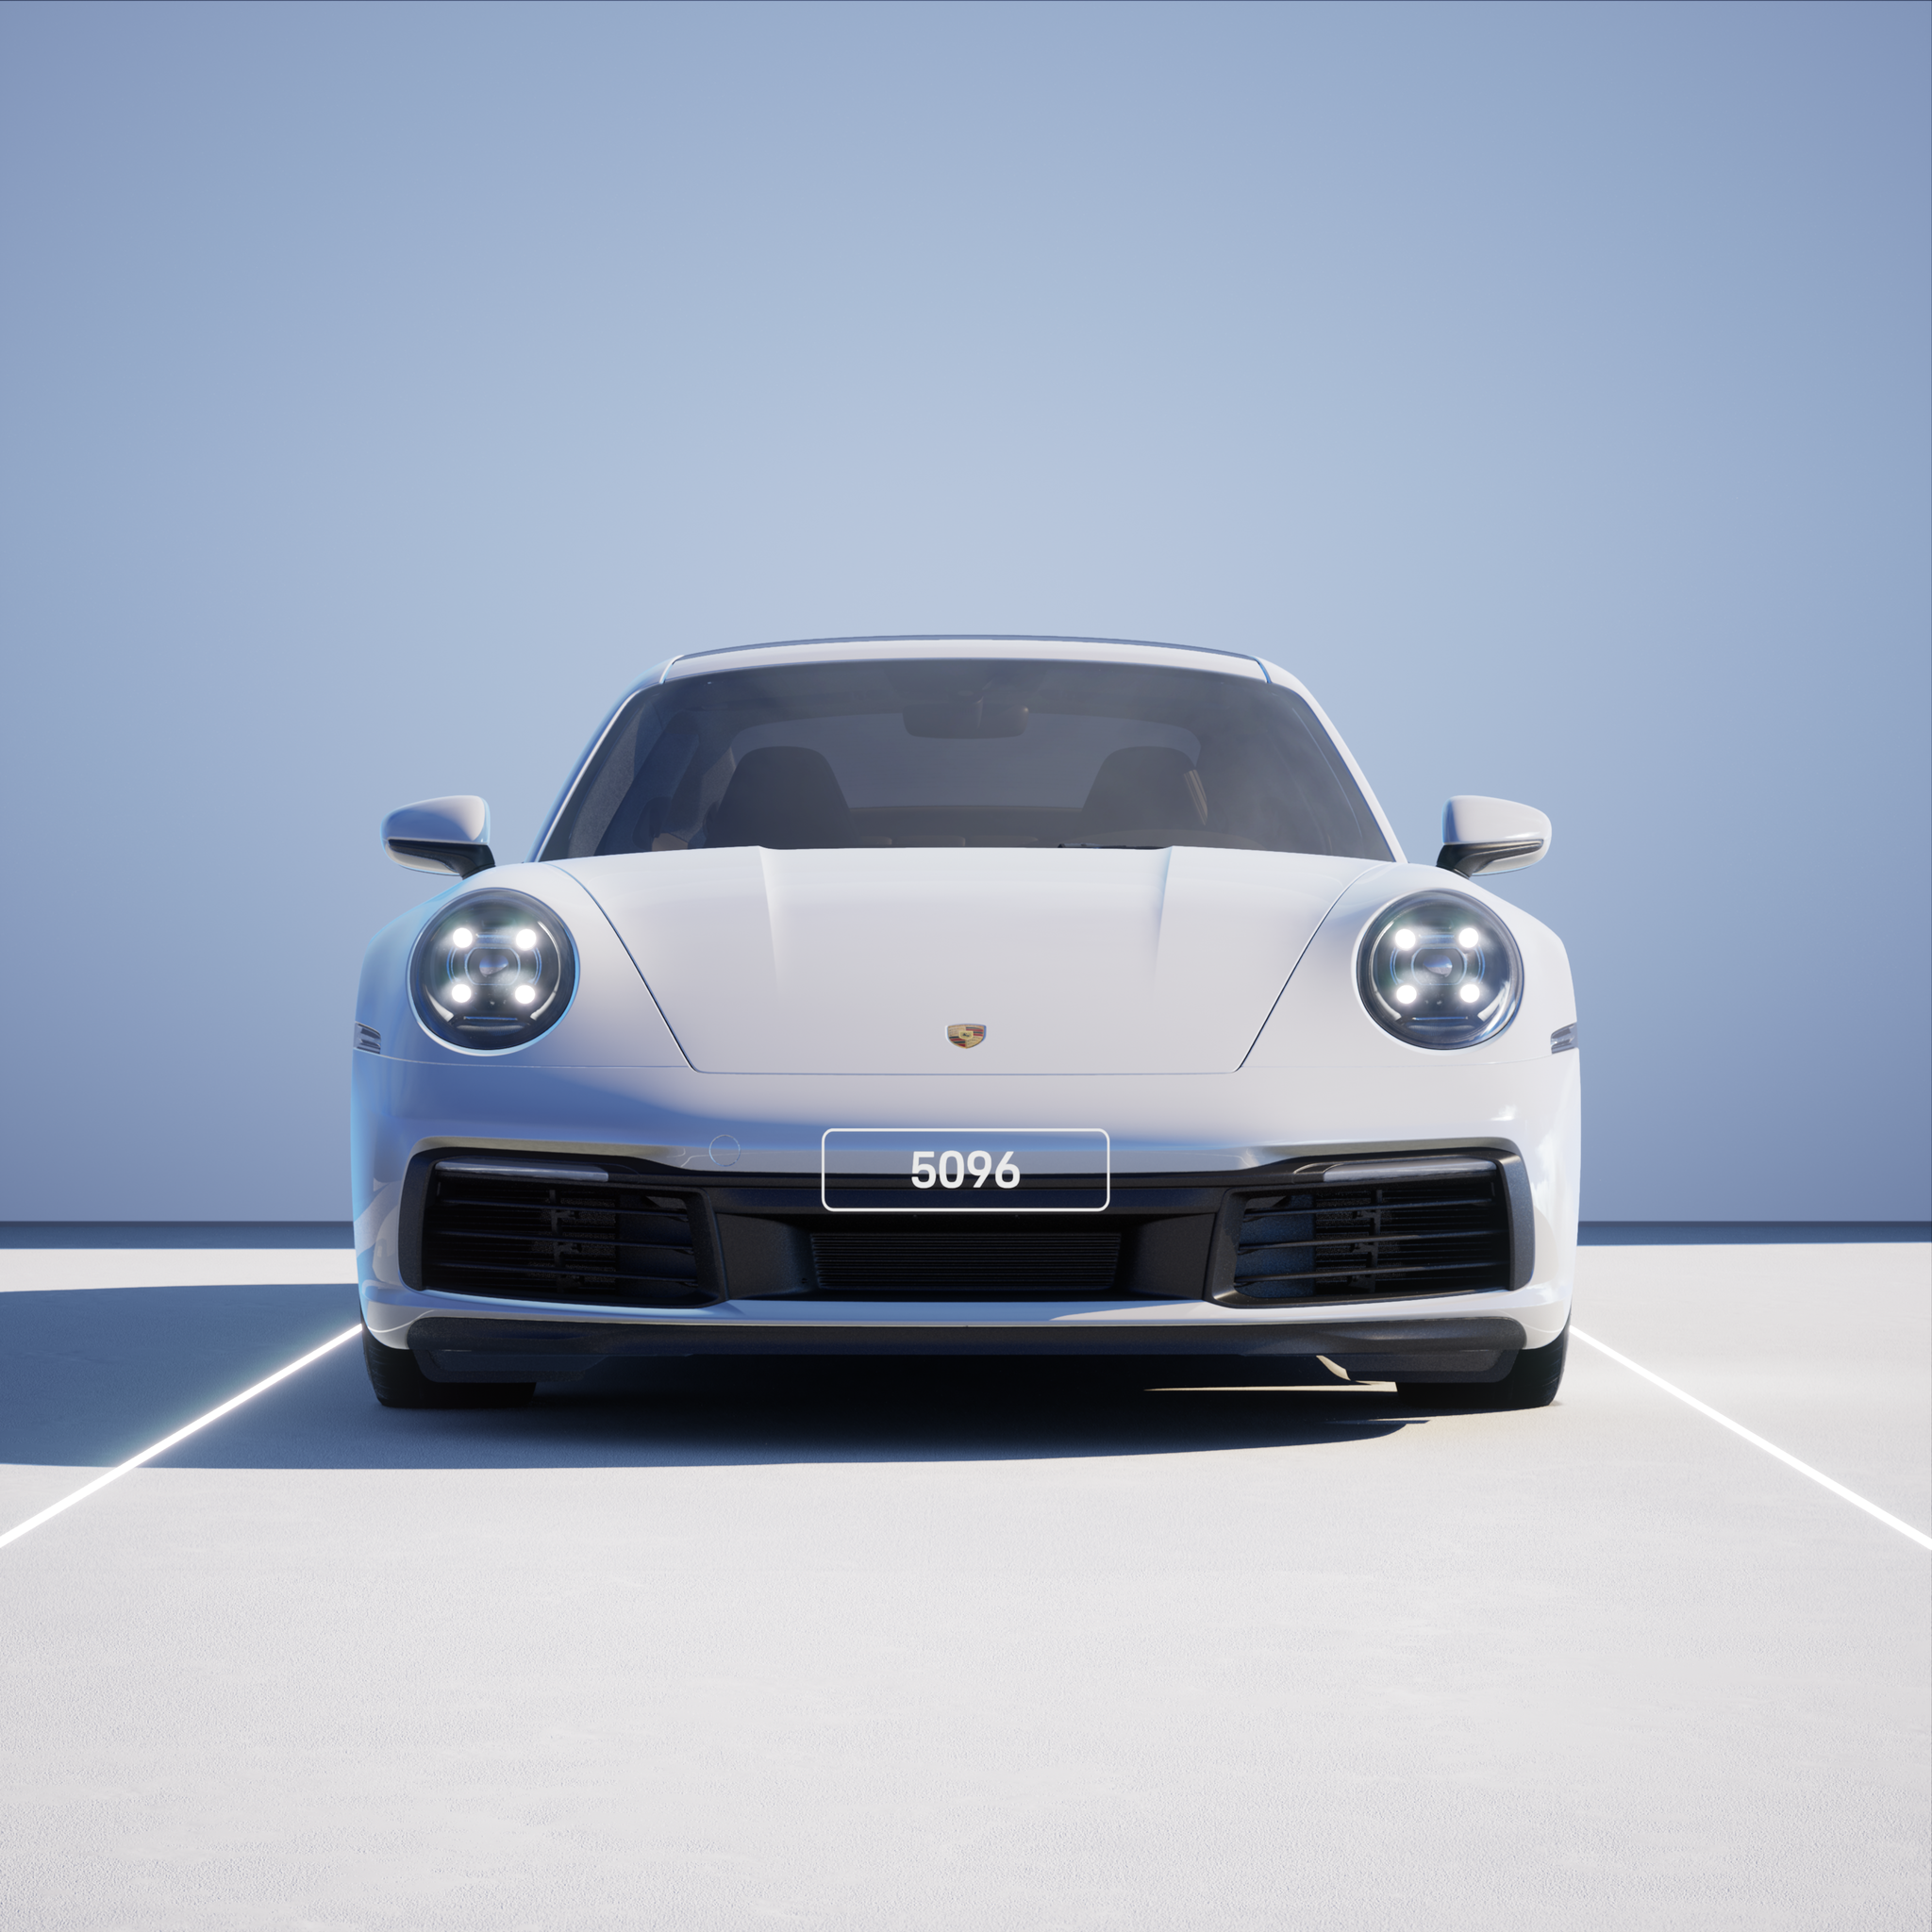 The PORSCHΞ 911 5096 image in phase